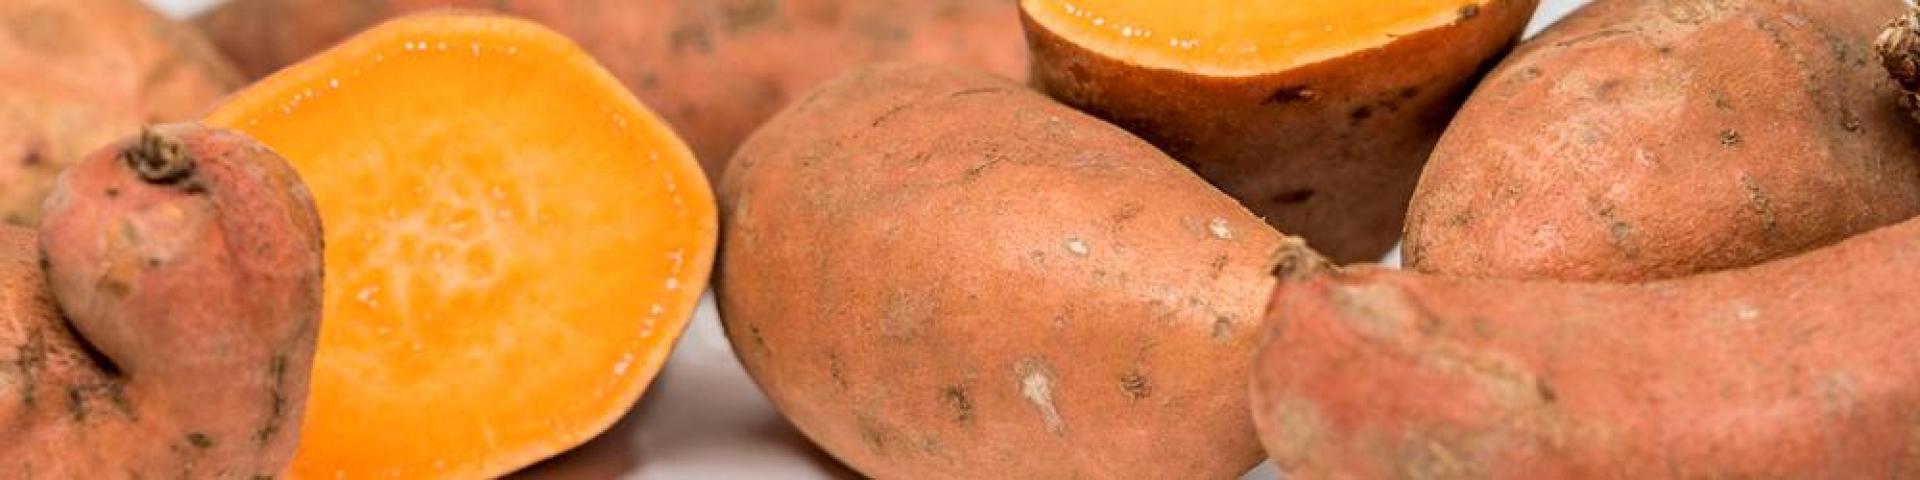 The European market potential for yams